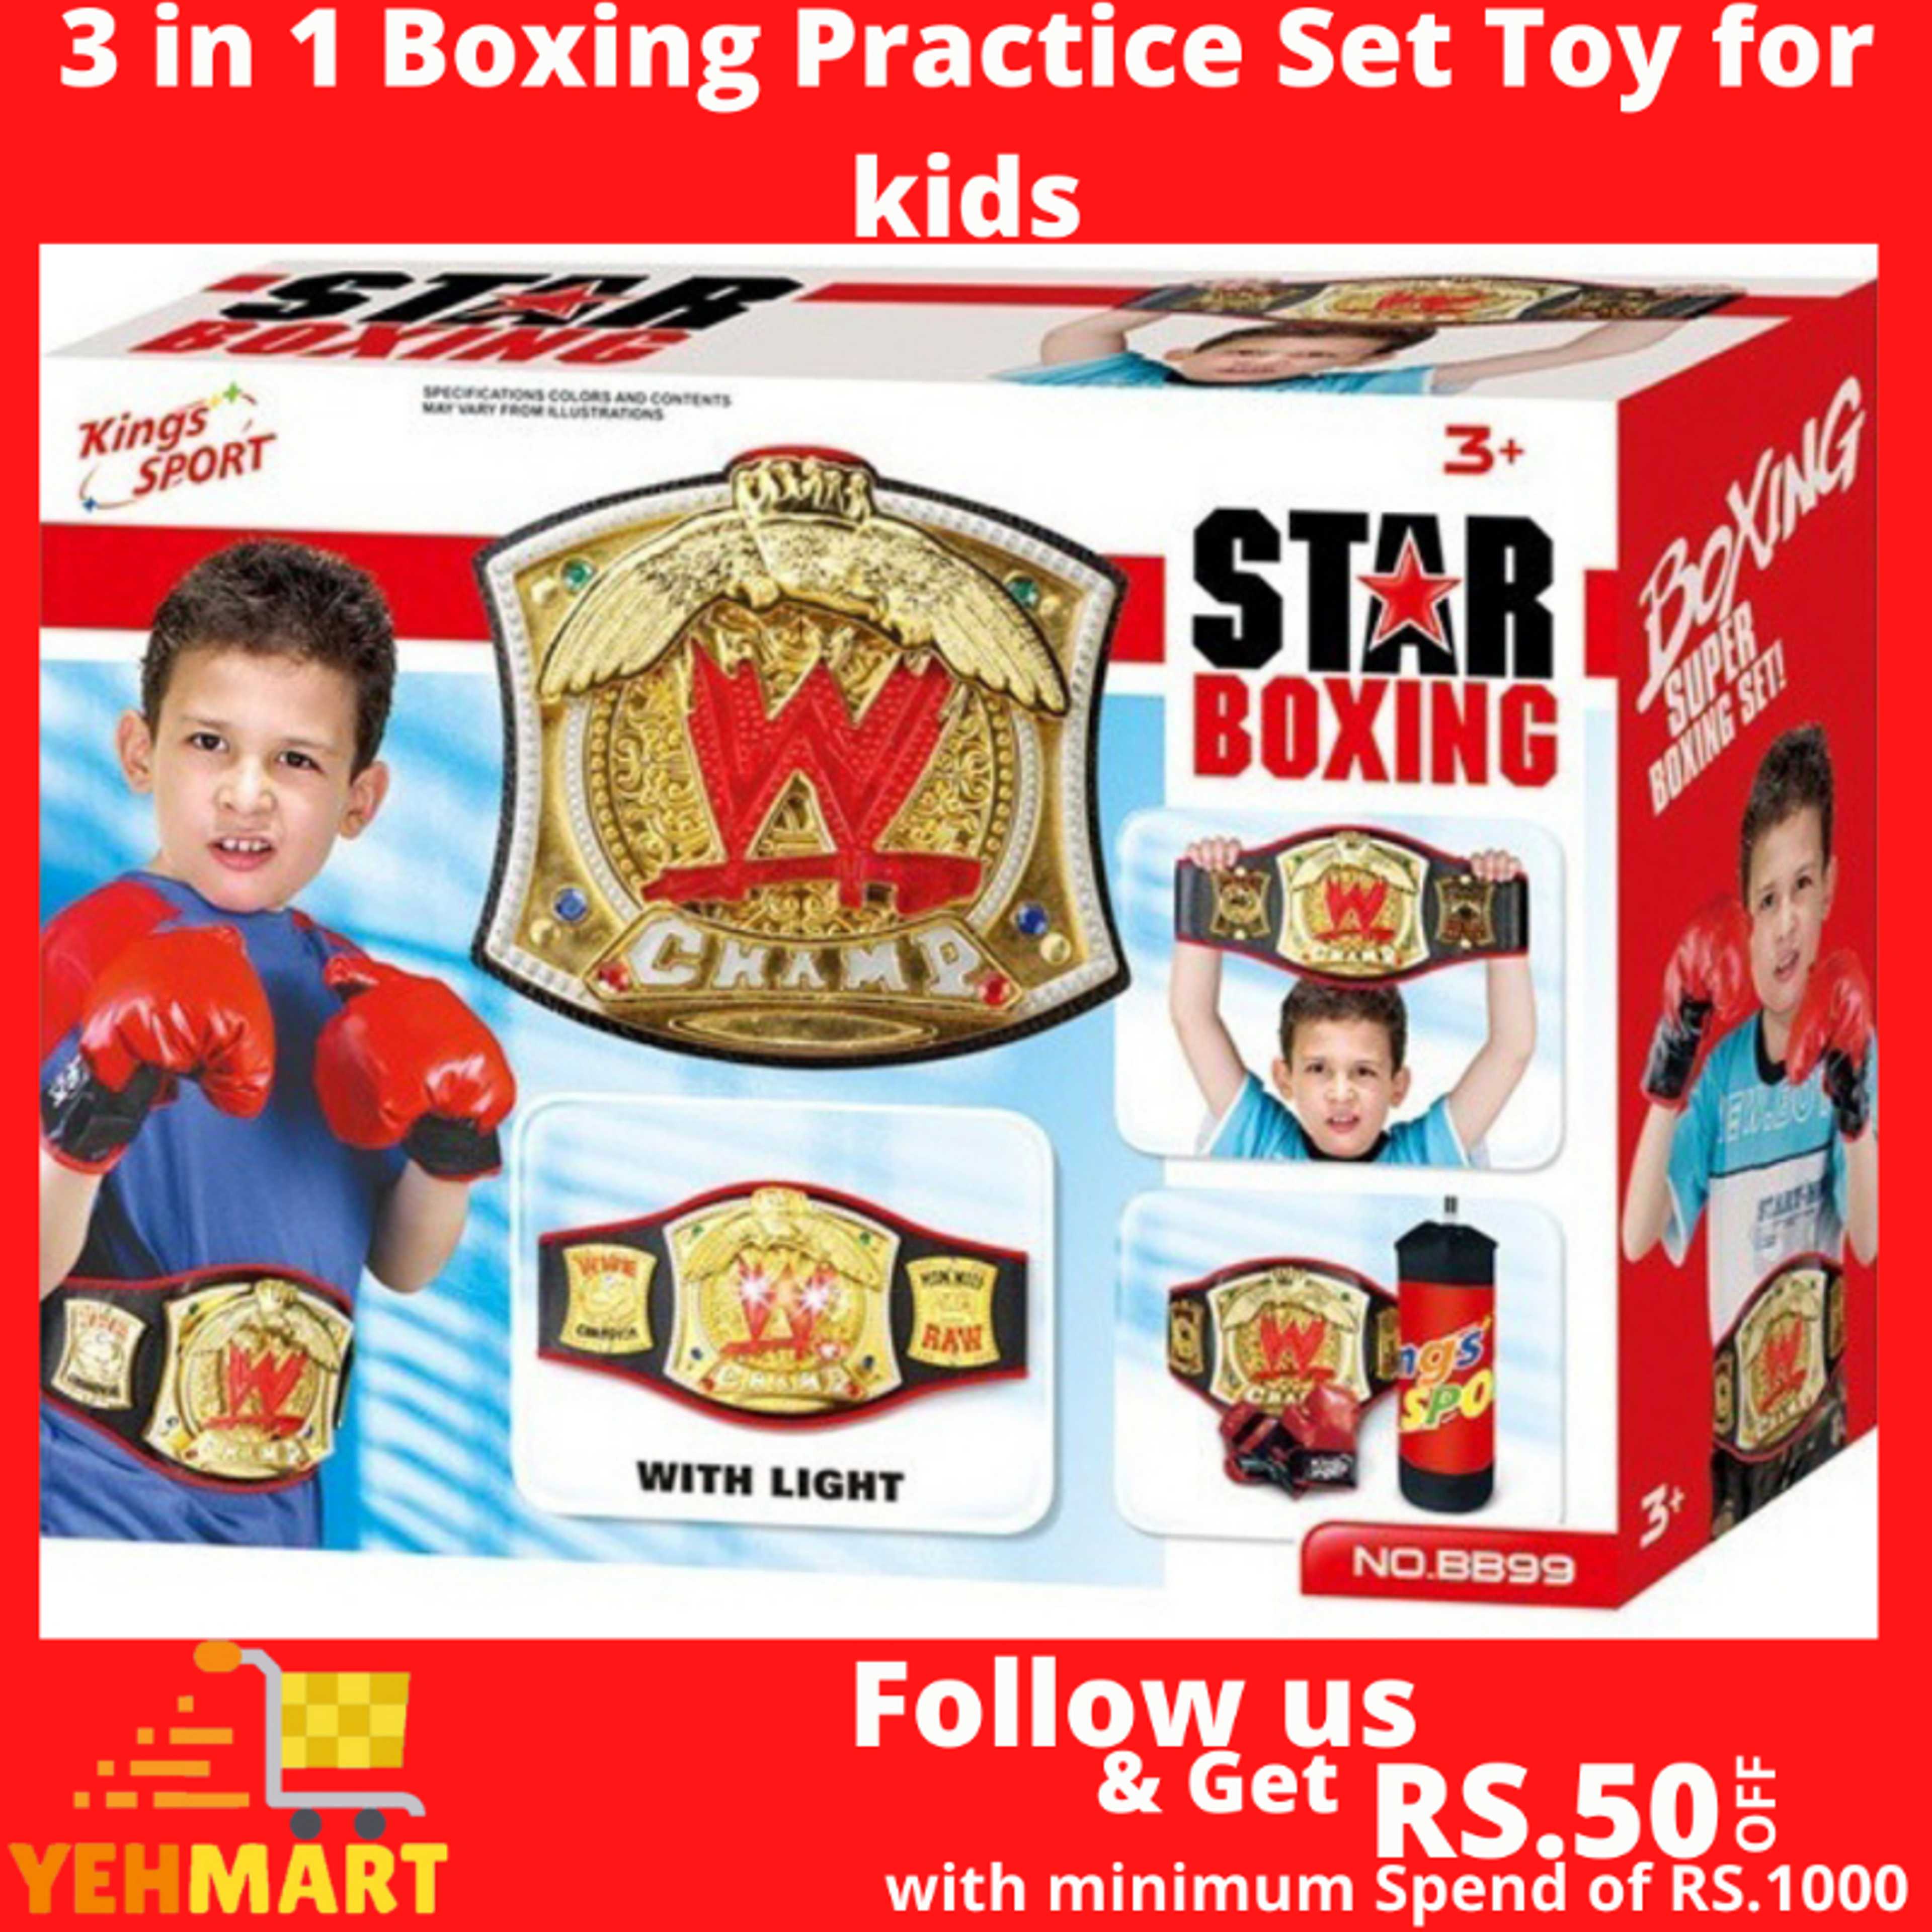 WWE Boxing Set Toy for kids 3 in 1 Boxing Practice Set with Gloves Belt and Punching Bag, high quality 3 in 1 boxing/punching set for kids